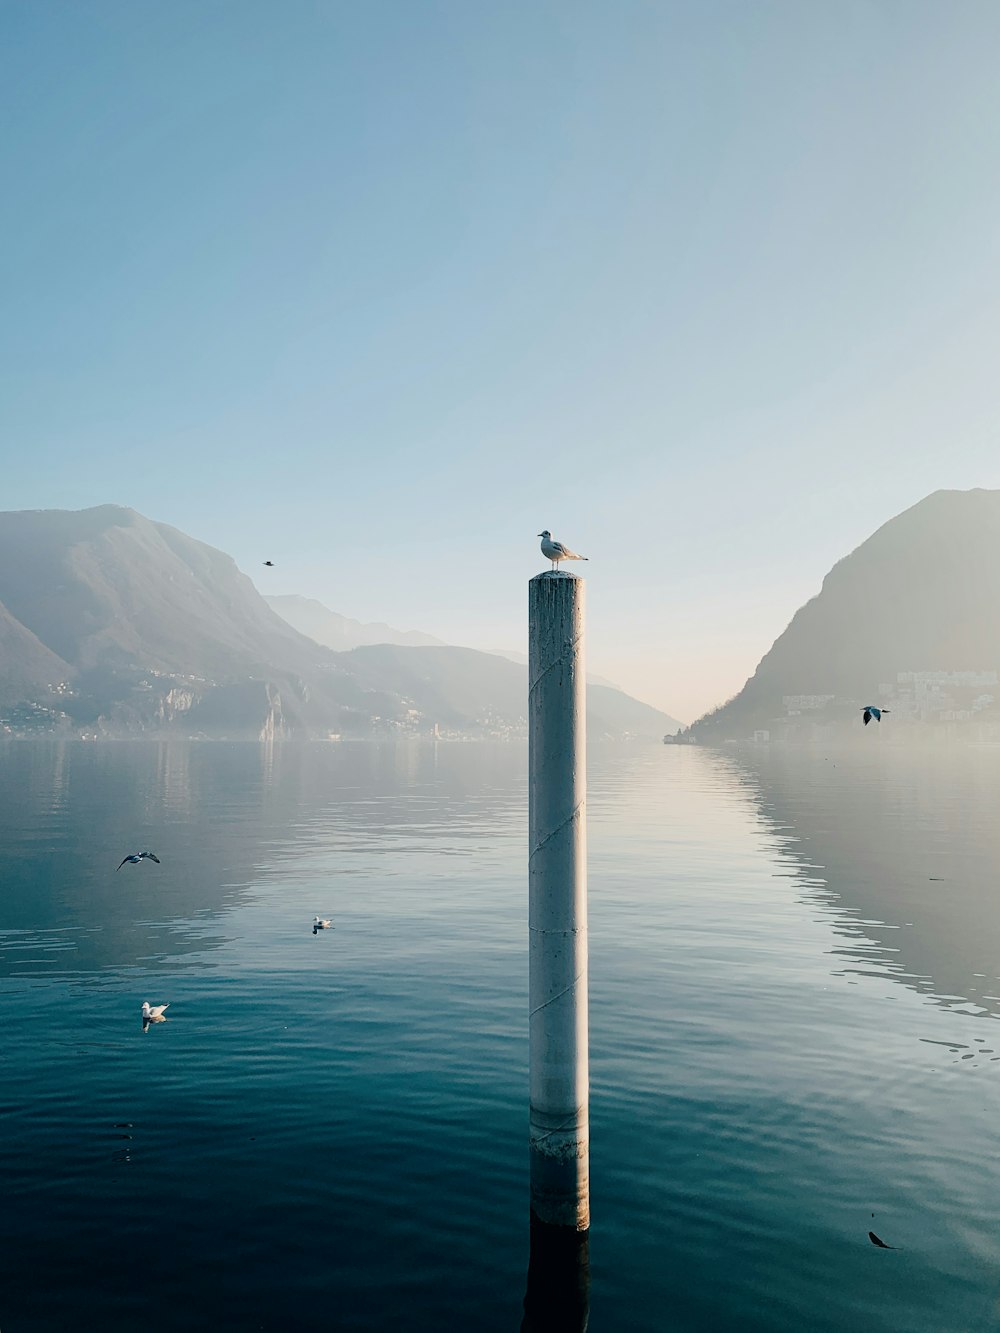 a bird sitting on a pole in the middle of a body of water